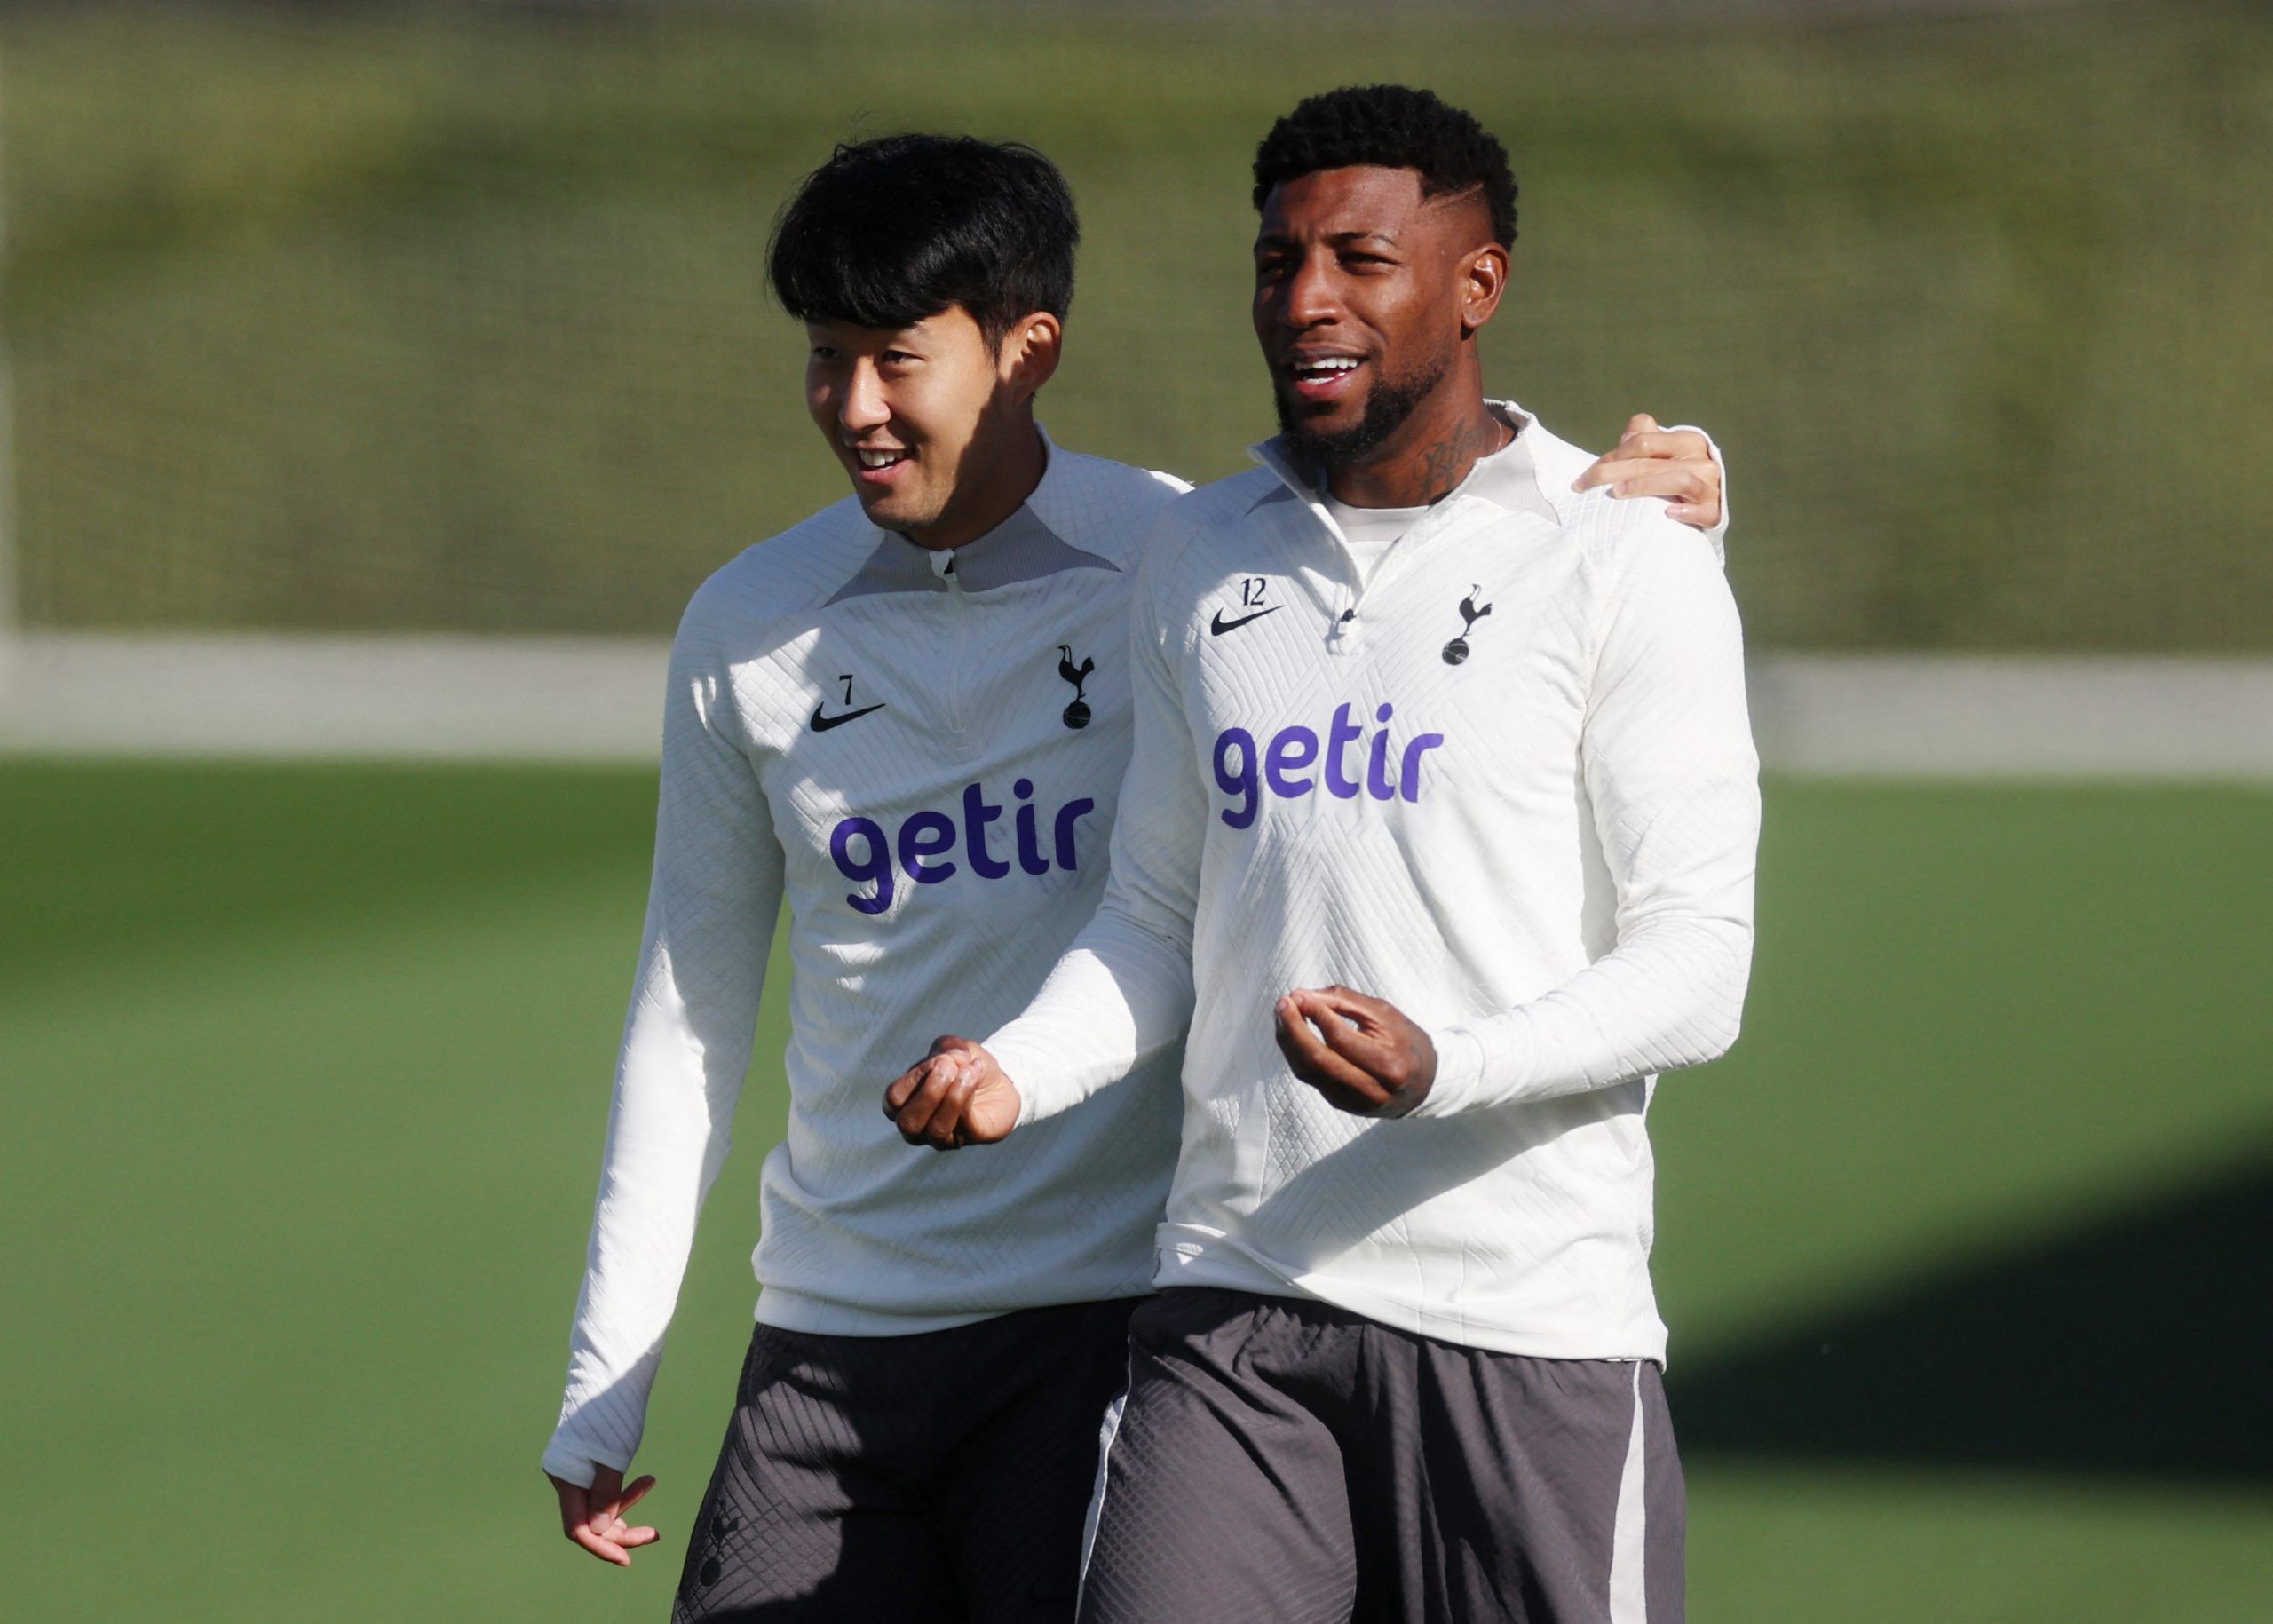 Soccer Football - Champions League - Tottenham Hotspur Training - Tottenham Hotspur Training Centre, London, Britain - October 11, 2022 Tottenham Hotspur's Son Heung-min and Emerson Royal during training Action Images via Reuters/Paul Childs